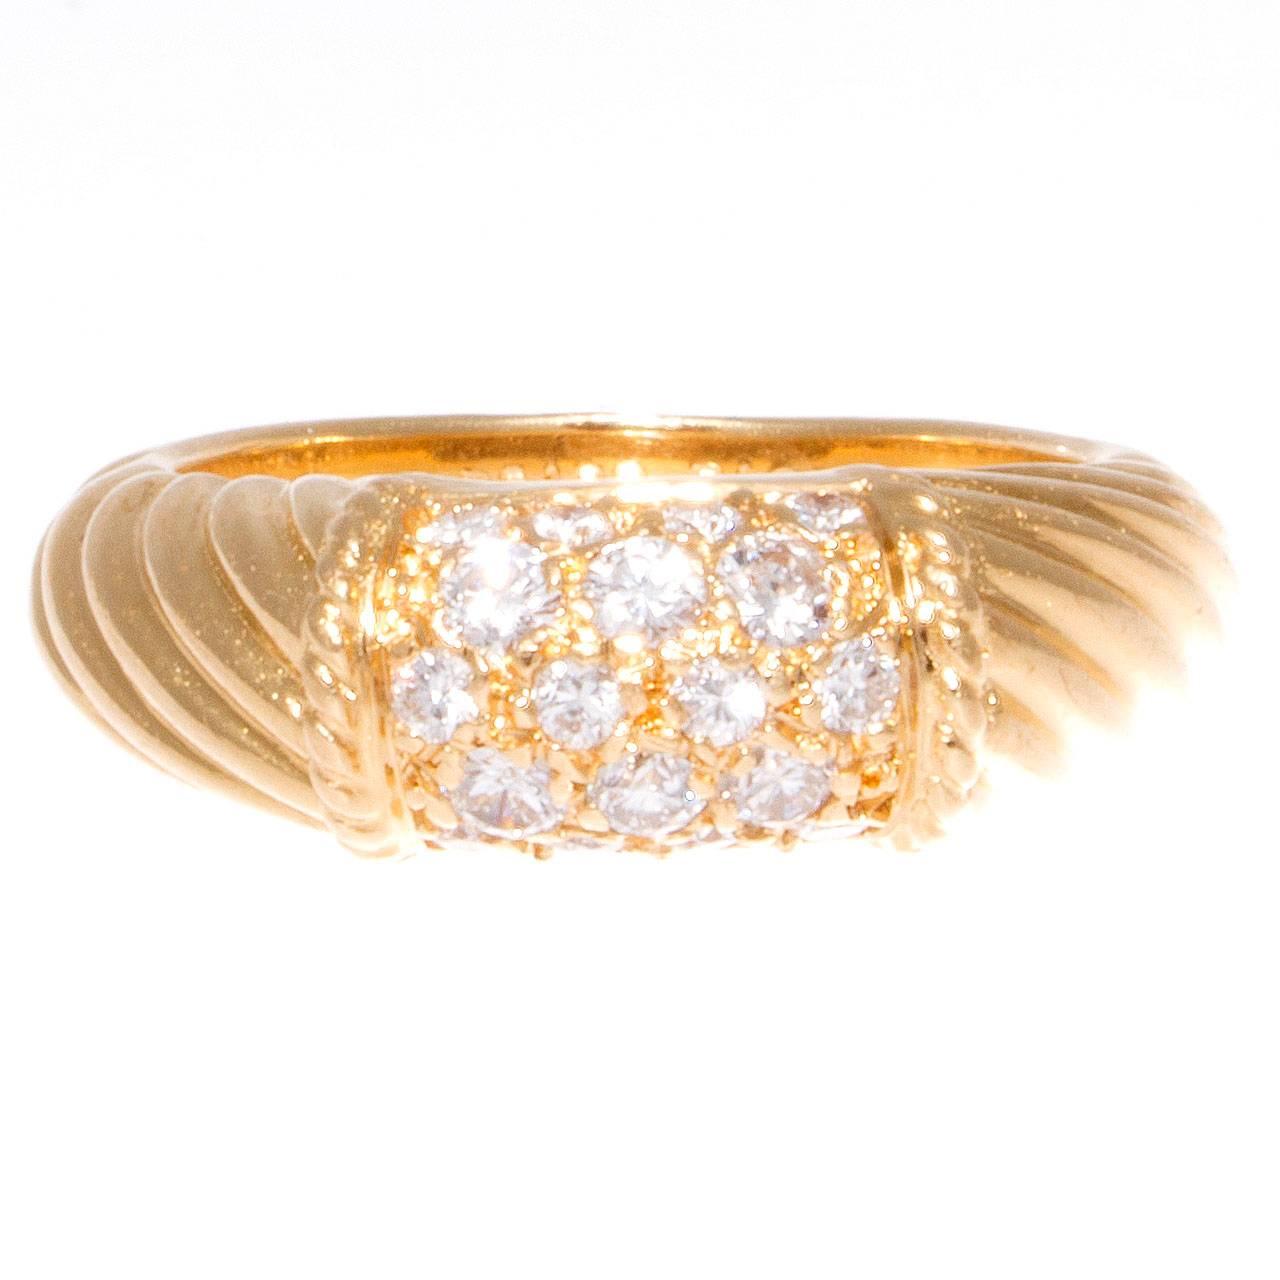 Elegance and timeless fashion from the French designers at Van Cleef & Arpels. This ring features numerous near colorless diamonds pave set in the twisting 18k yellow gold. Signed VCA and numbered.

Ring size 6 1/4 and may be re-sized.